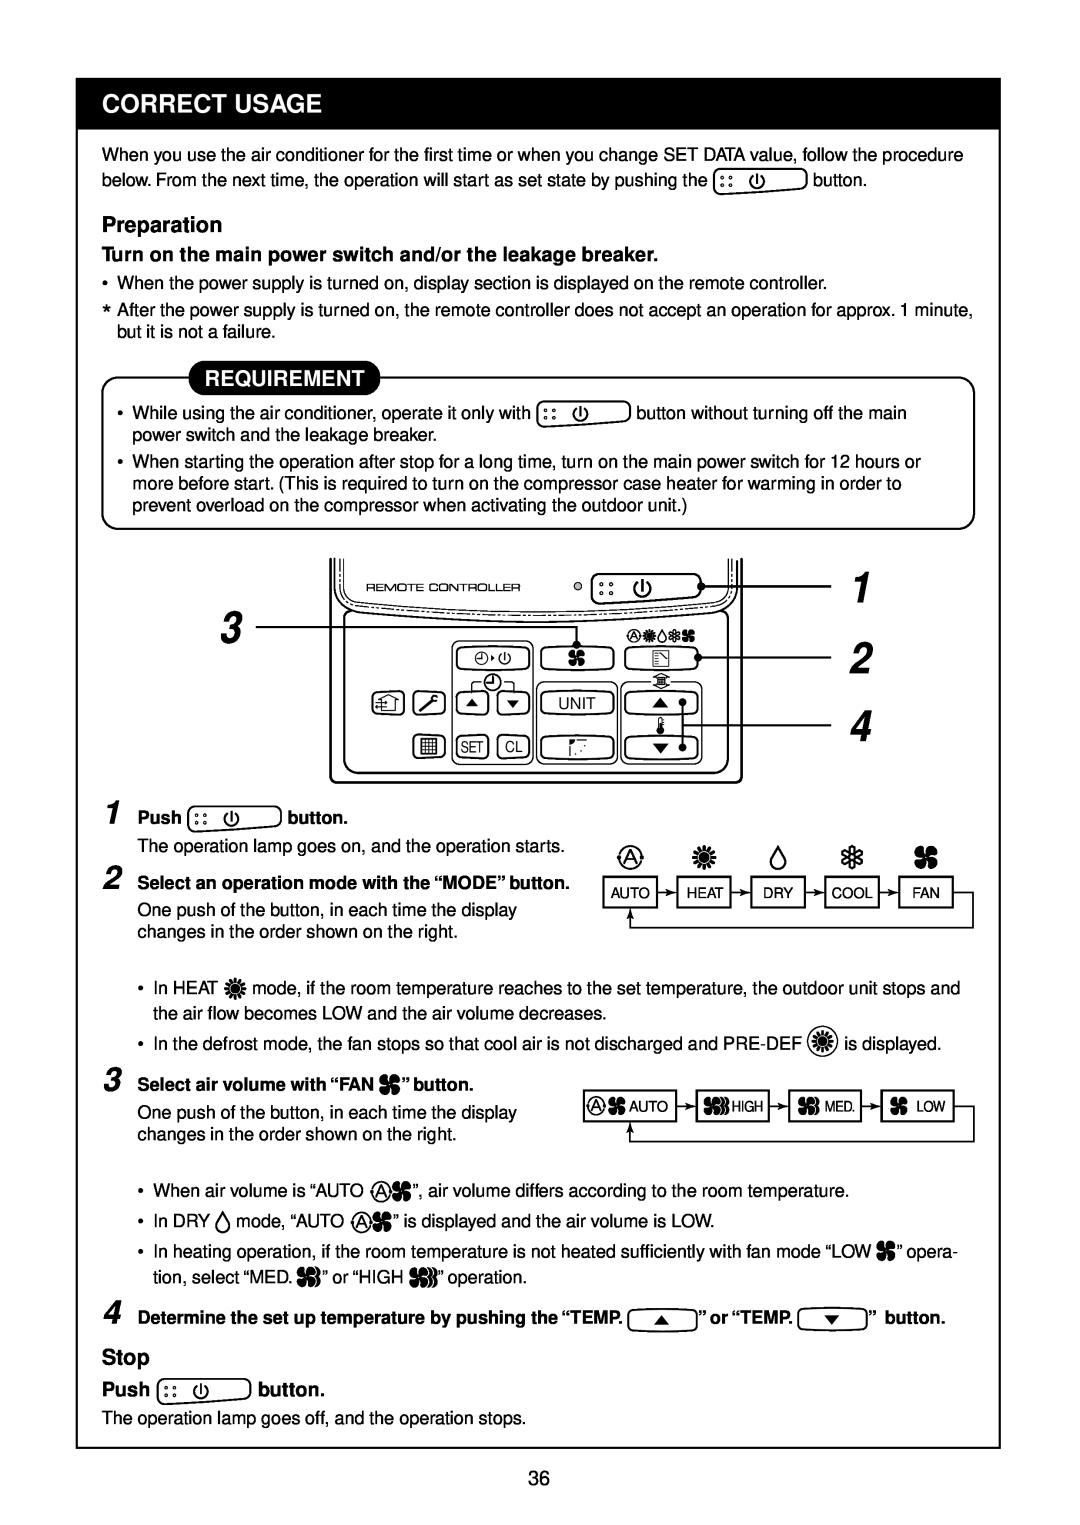 Toshiba R410A service manual 1 2 4, Correct Usage, Preparation, Requirement, Stop, Push button 